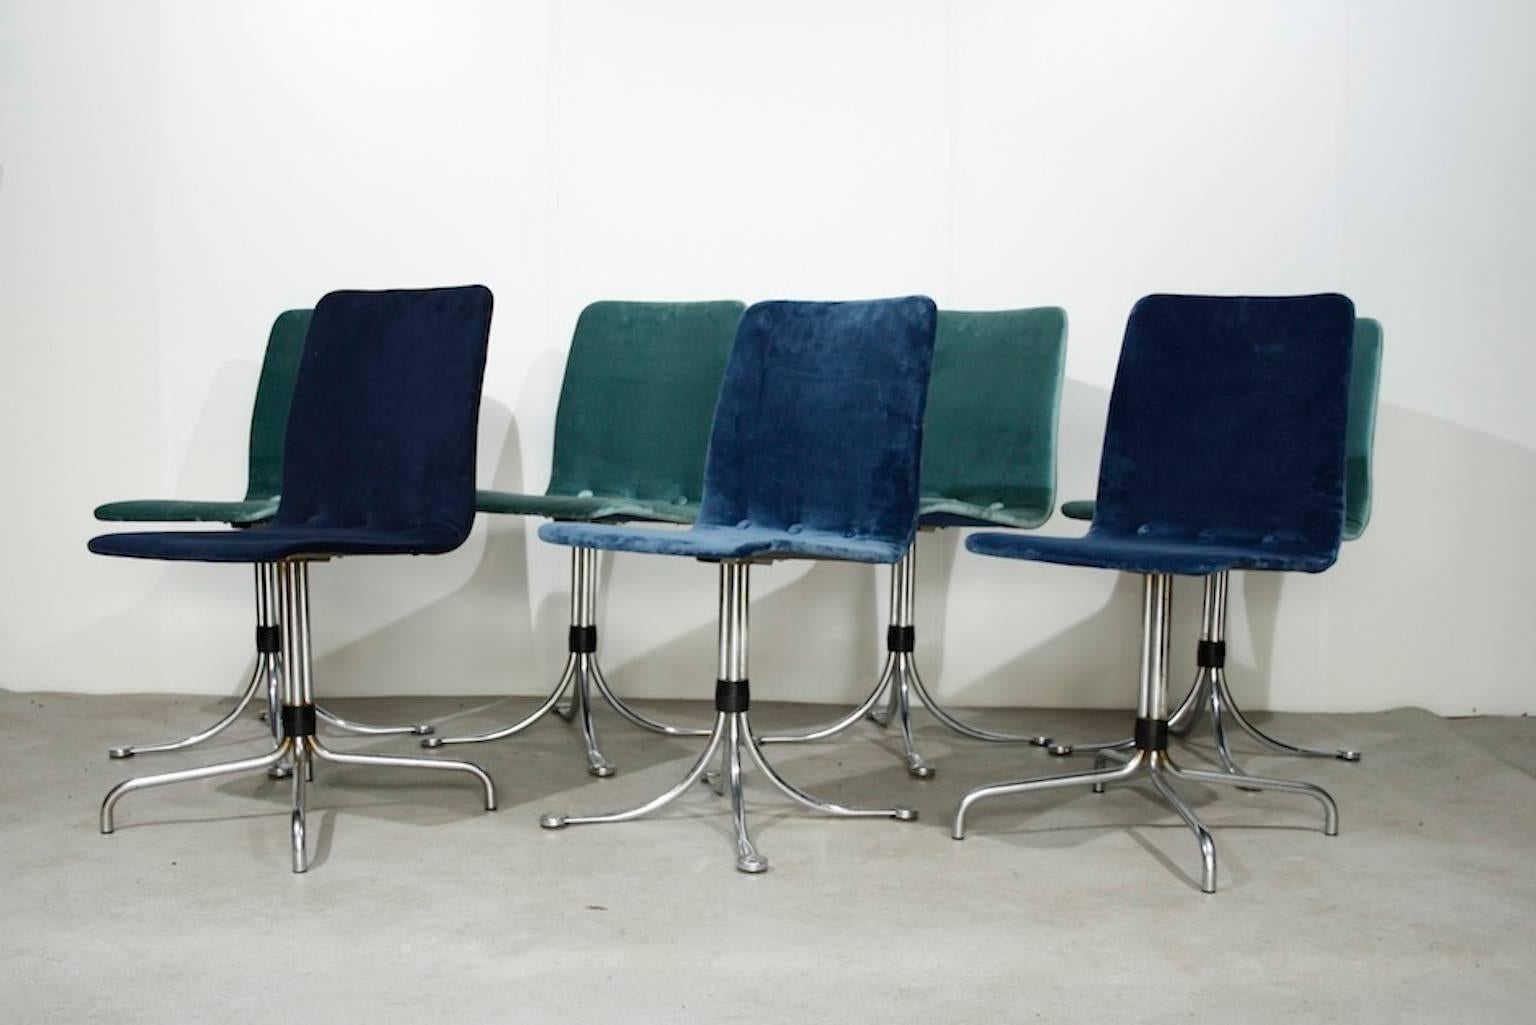 Four with new mint green velvet upholstery. And three with dark blue velvet upholstery, but with two different metal feet.
The green and blue can be sold separately.

Height: 84 cm ; seating: 47 cm
Width: 43 cm
Depth: 46 cm; seating 36 cm